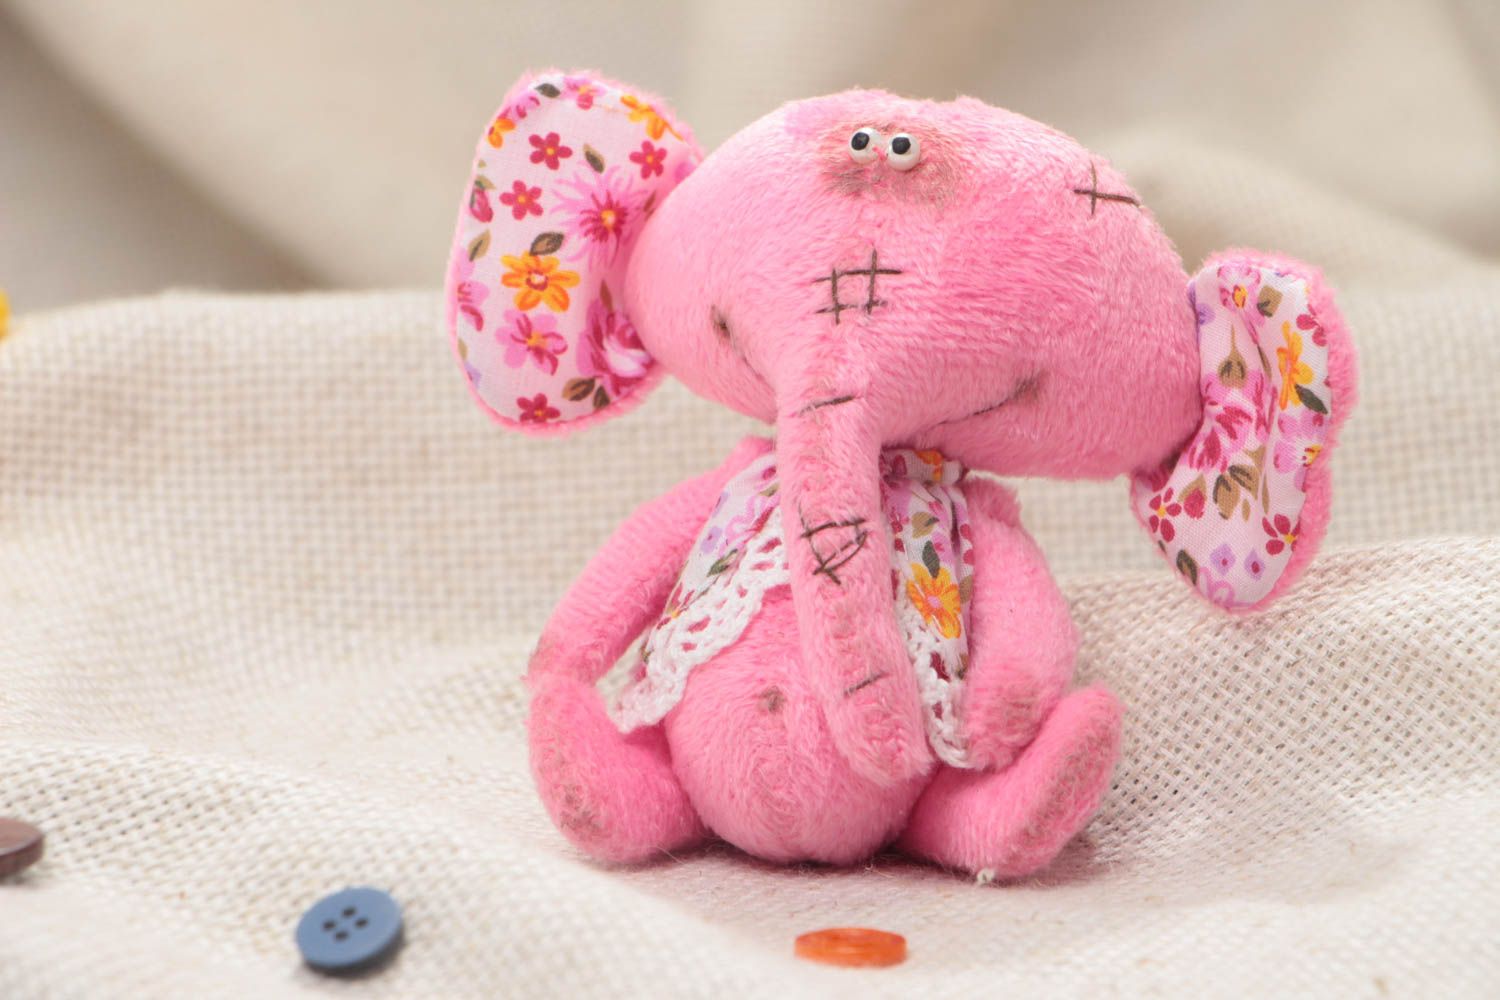 Handmade small vintage soft toy sewn of plush pink elephant with floral ears photo 1